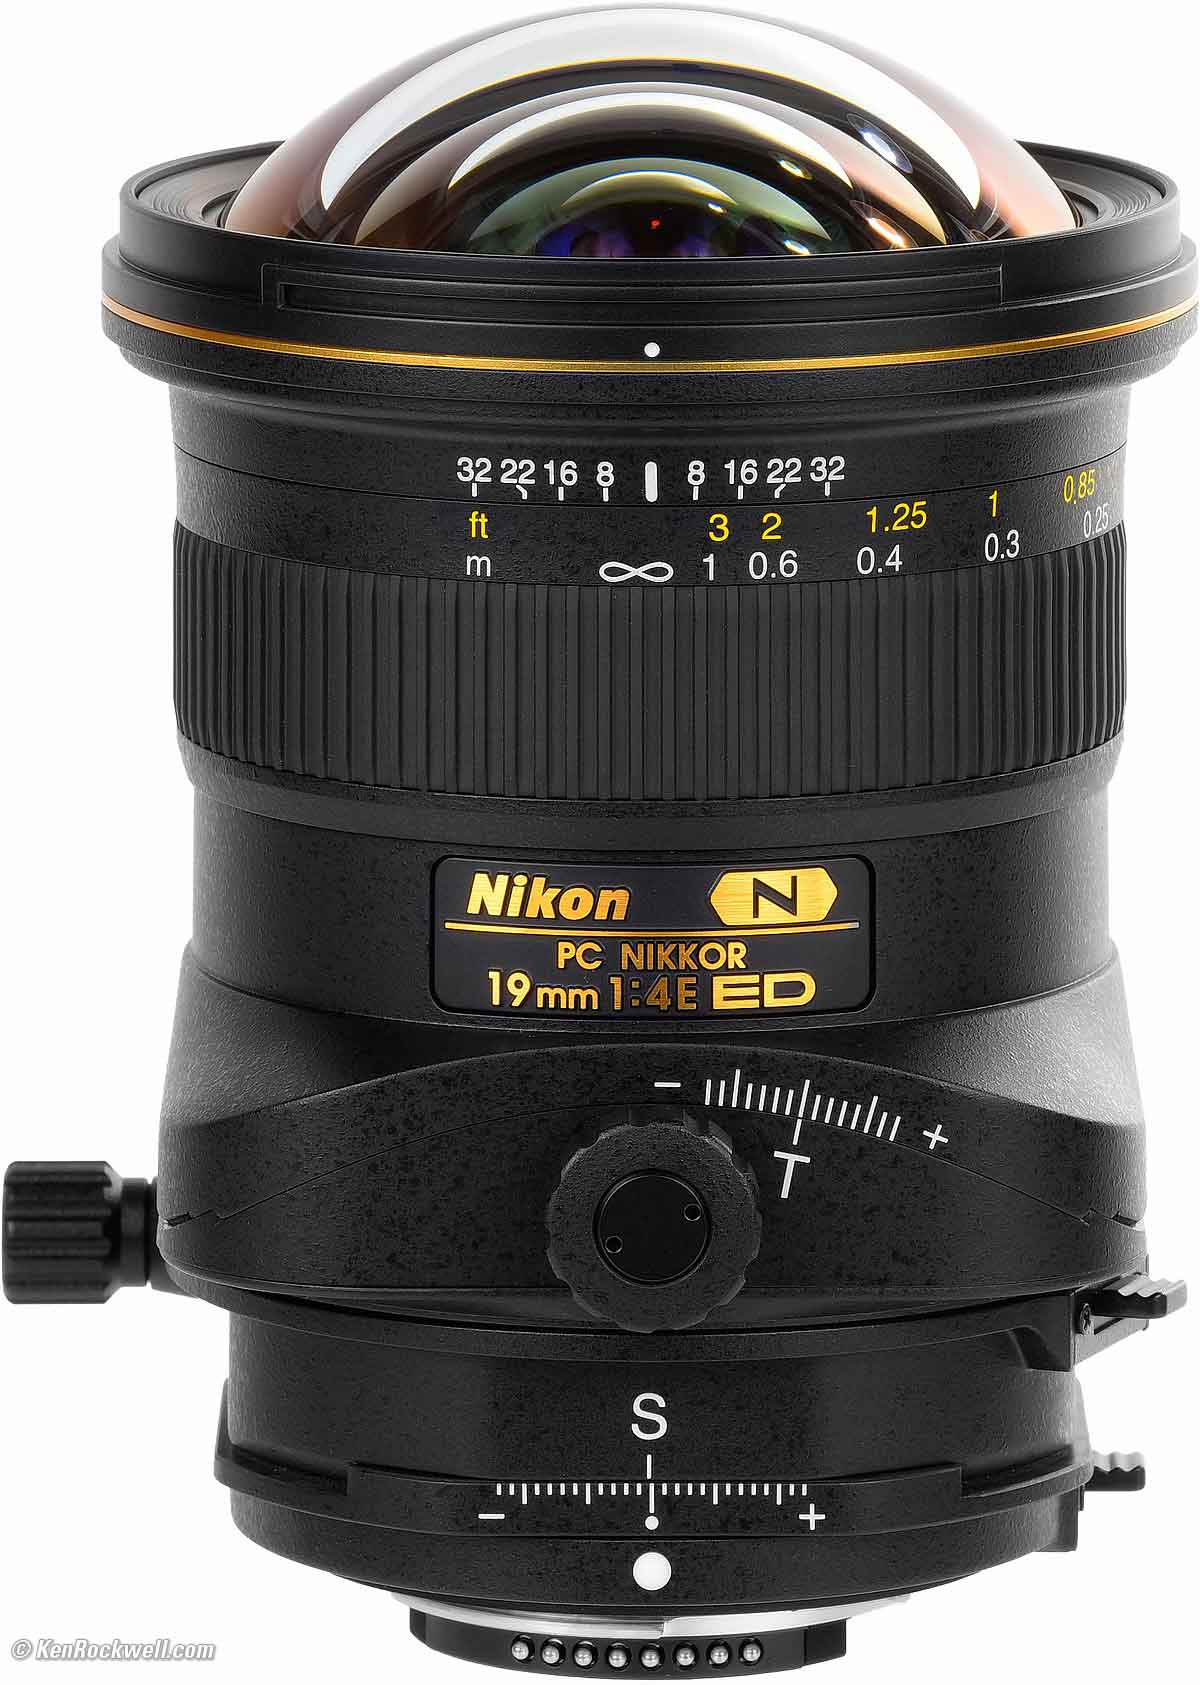 What You Didn't Know About the Shift Function on Tilt-Shift Lenses